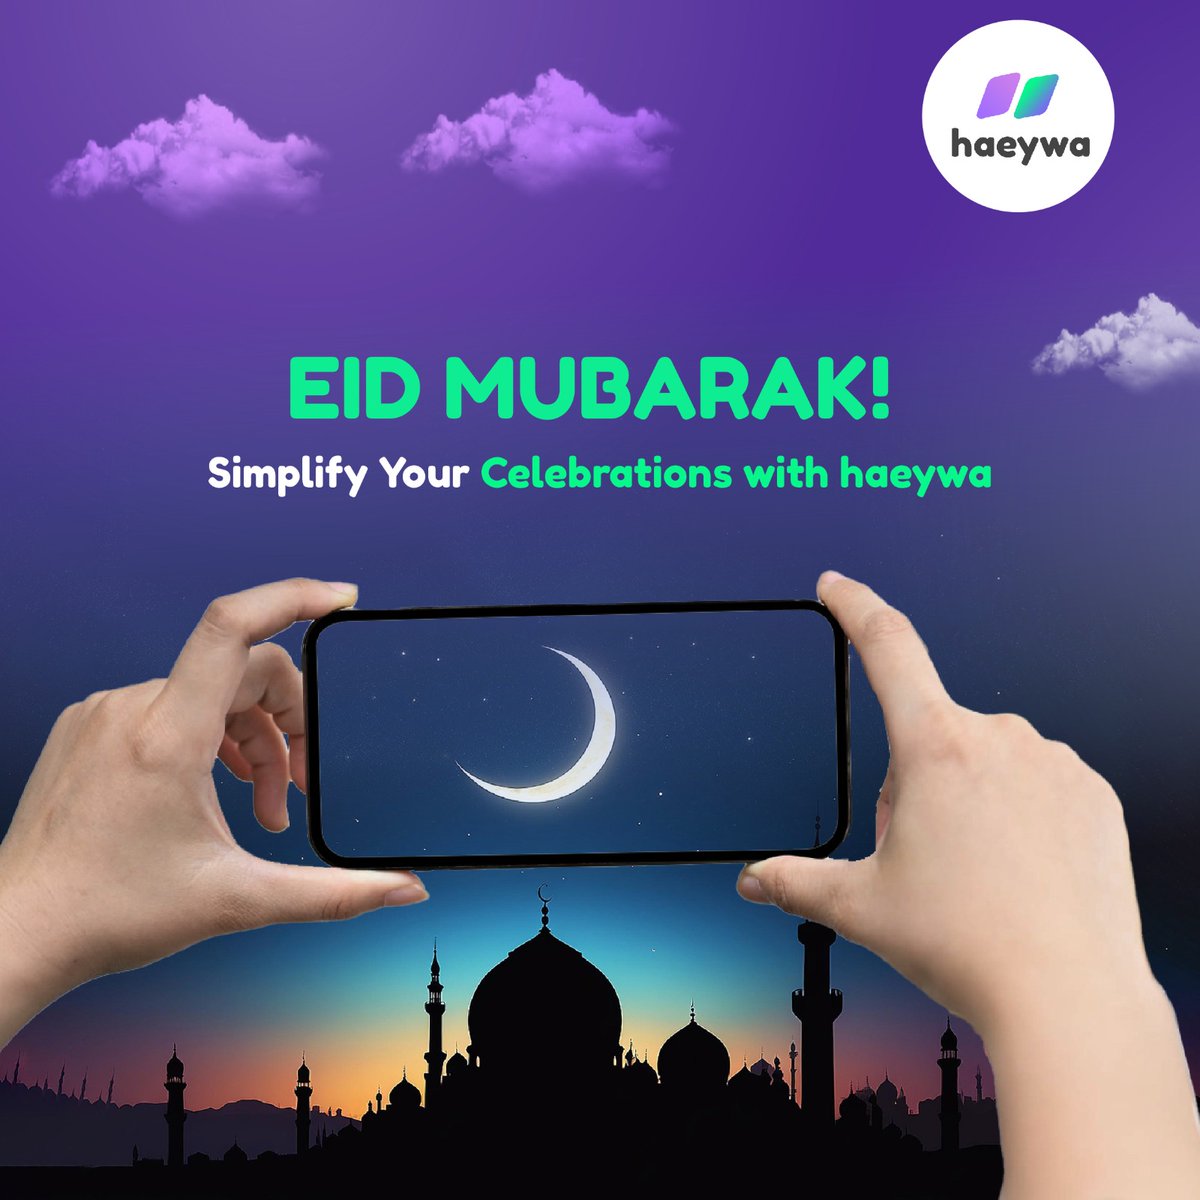 This Eid, let haeywa handle your business payments and expenses while you focus on what truly matters – cherishing moments with loved ones. Eid Mubarak from the haeywa family!
.
.
.
#haeywaApp #ExpenseManagement #FinancialControl